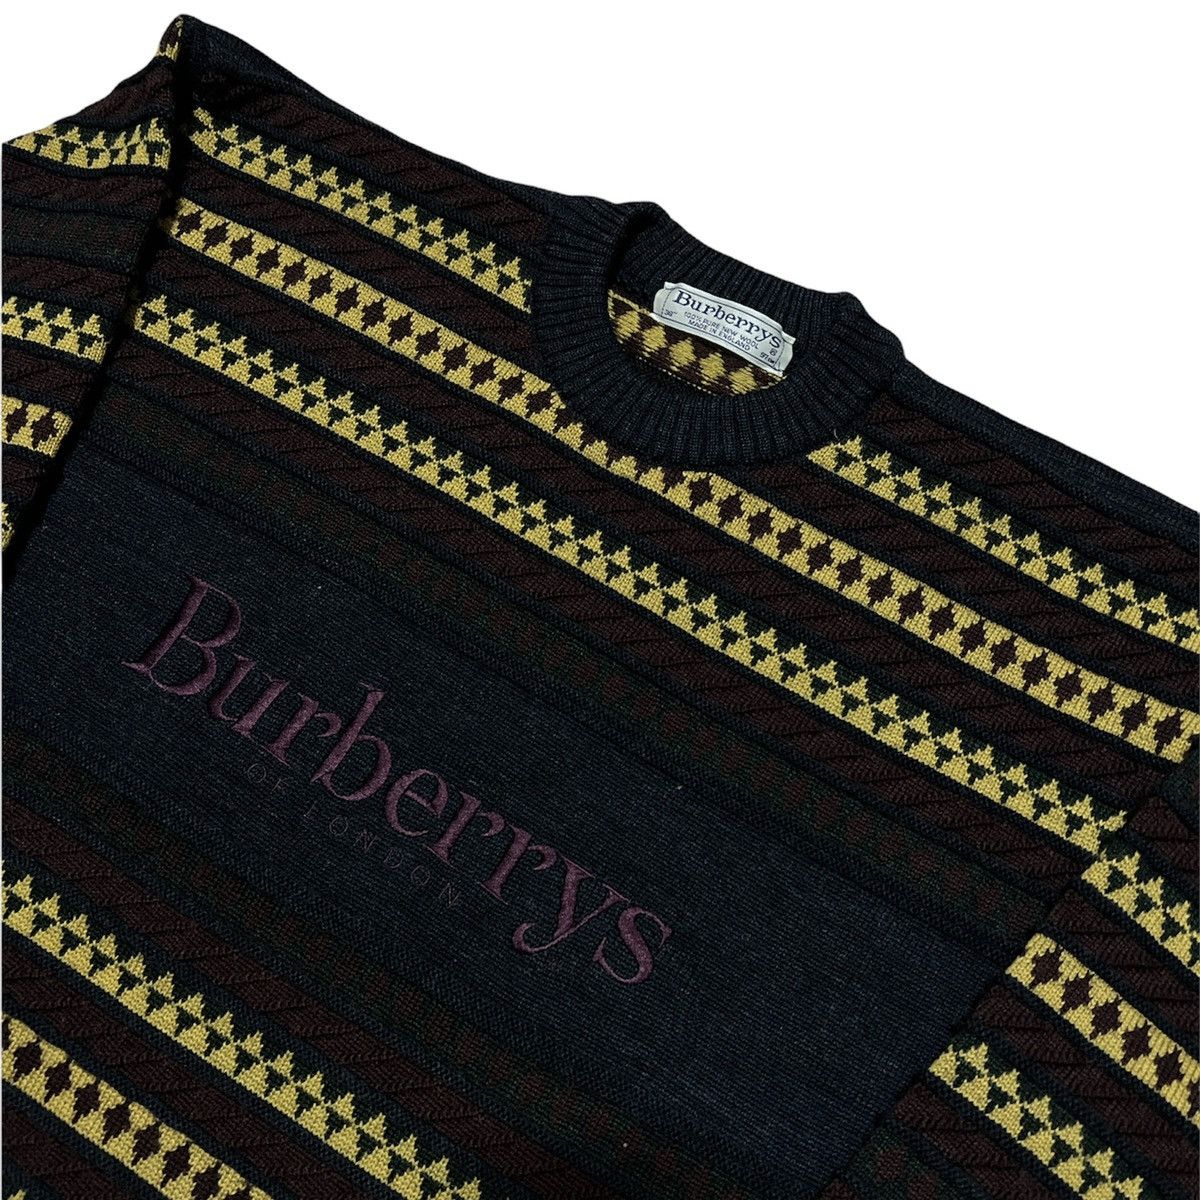 Vintage Burberrys embroidered knit sweater - 2